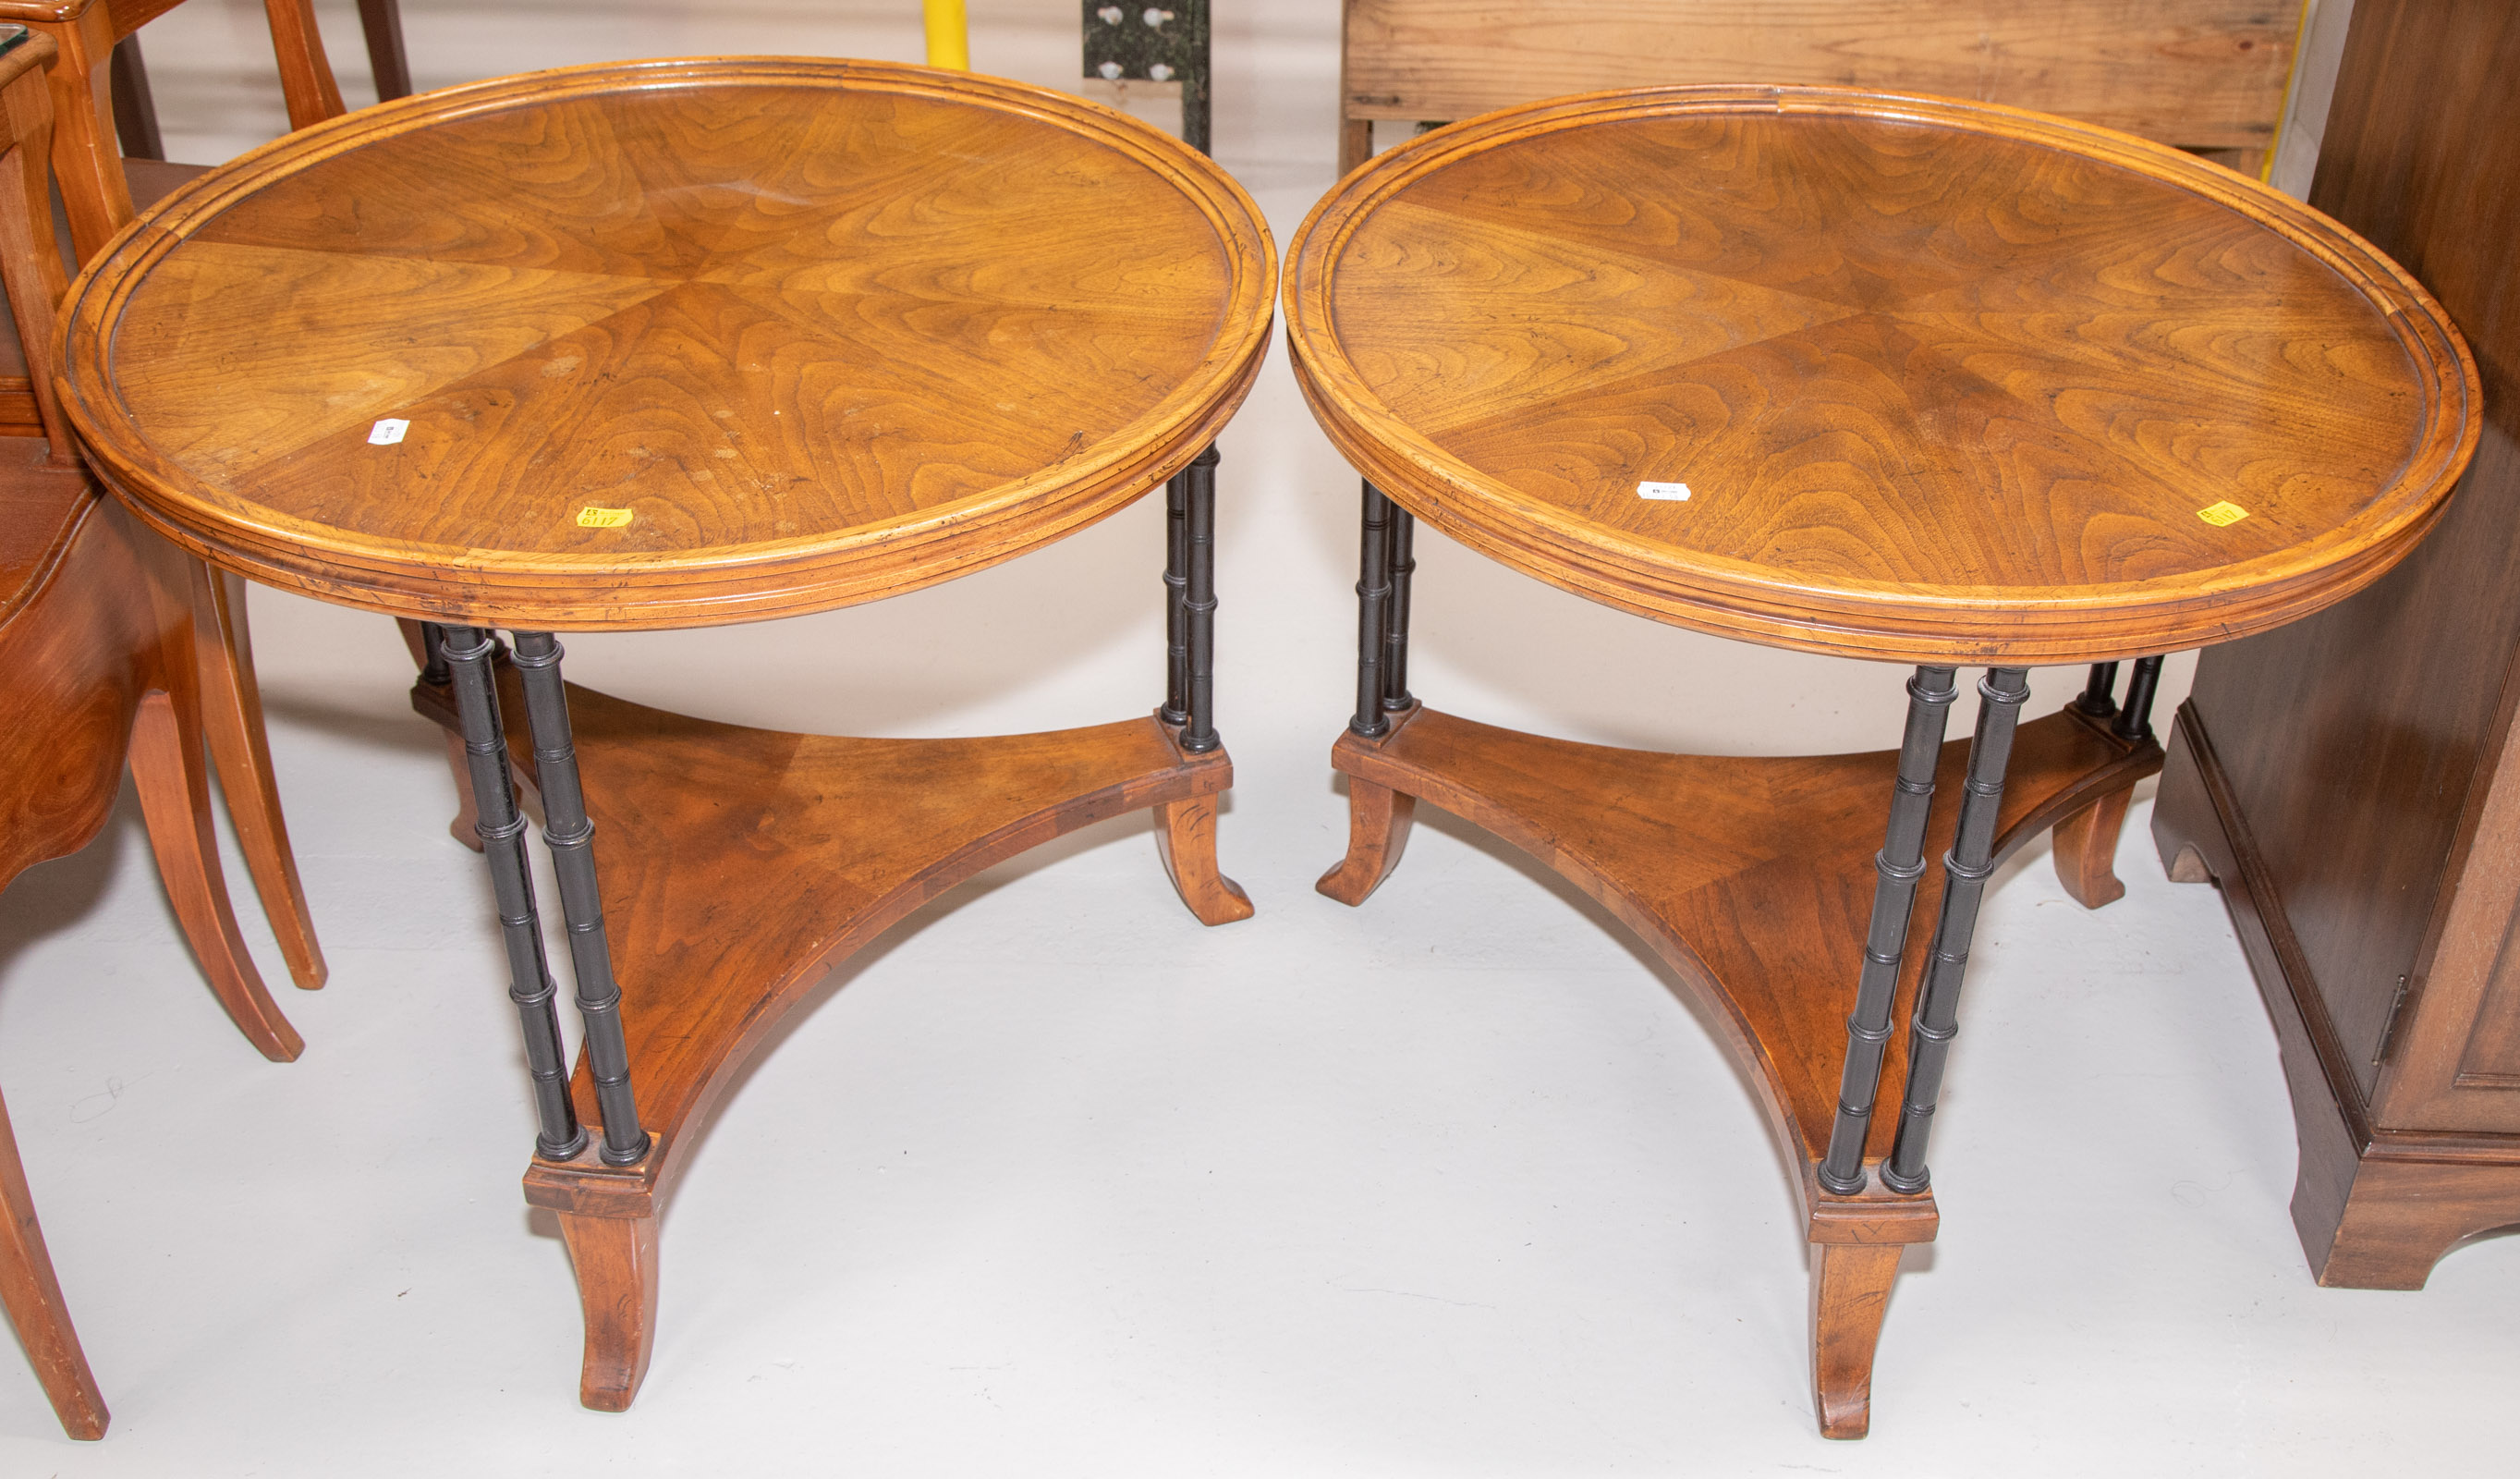 A PAIR OF NEOCLASSICAL STYLE ROUND END